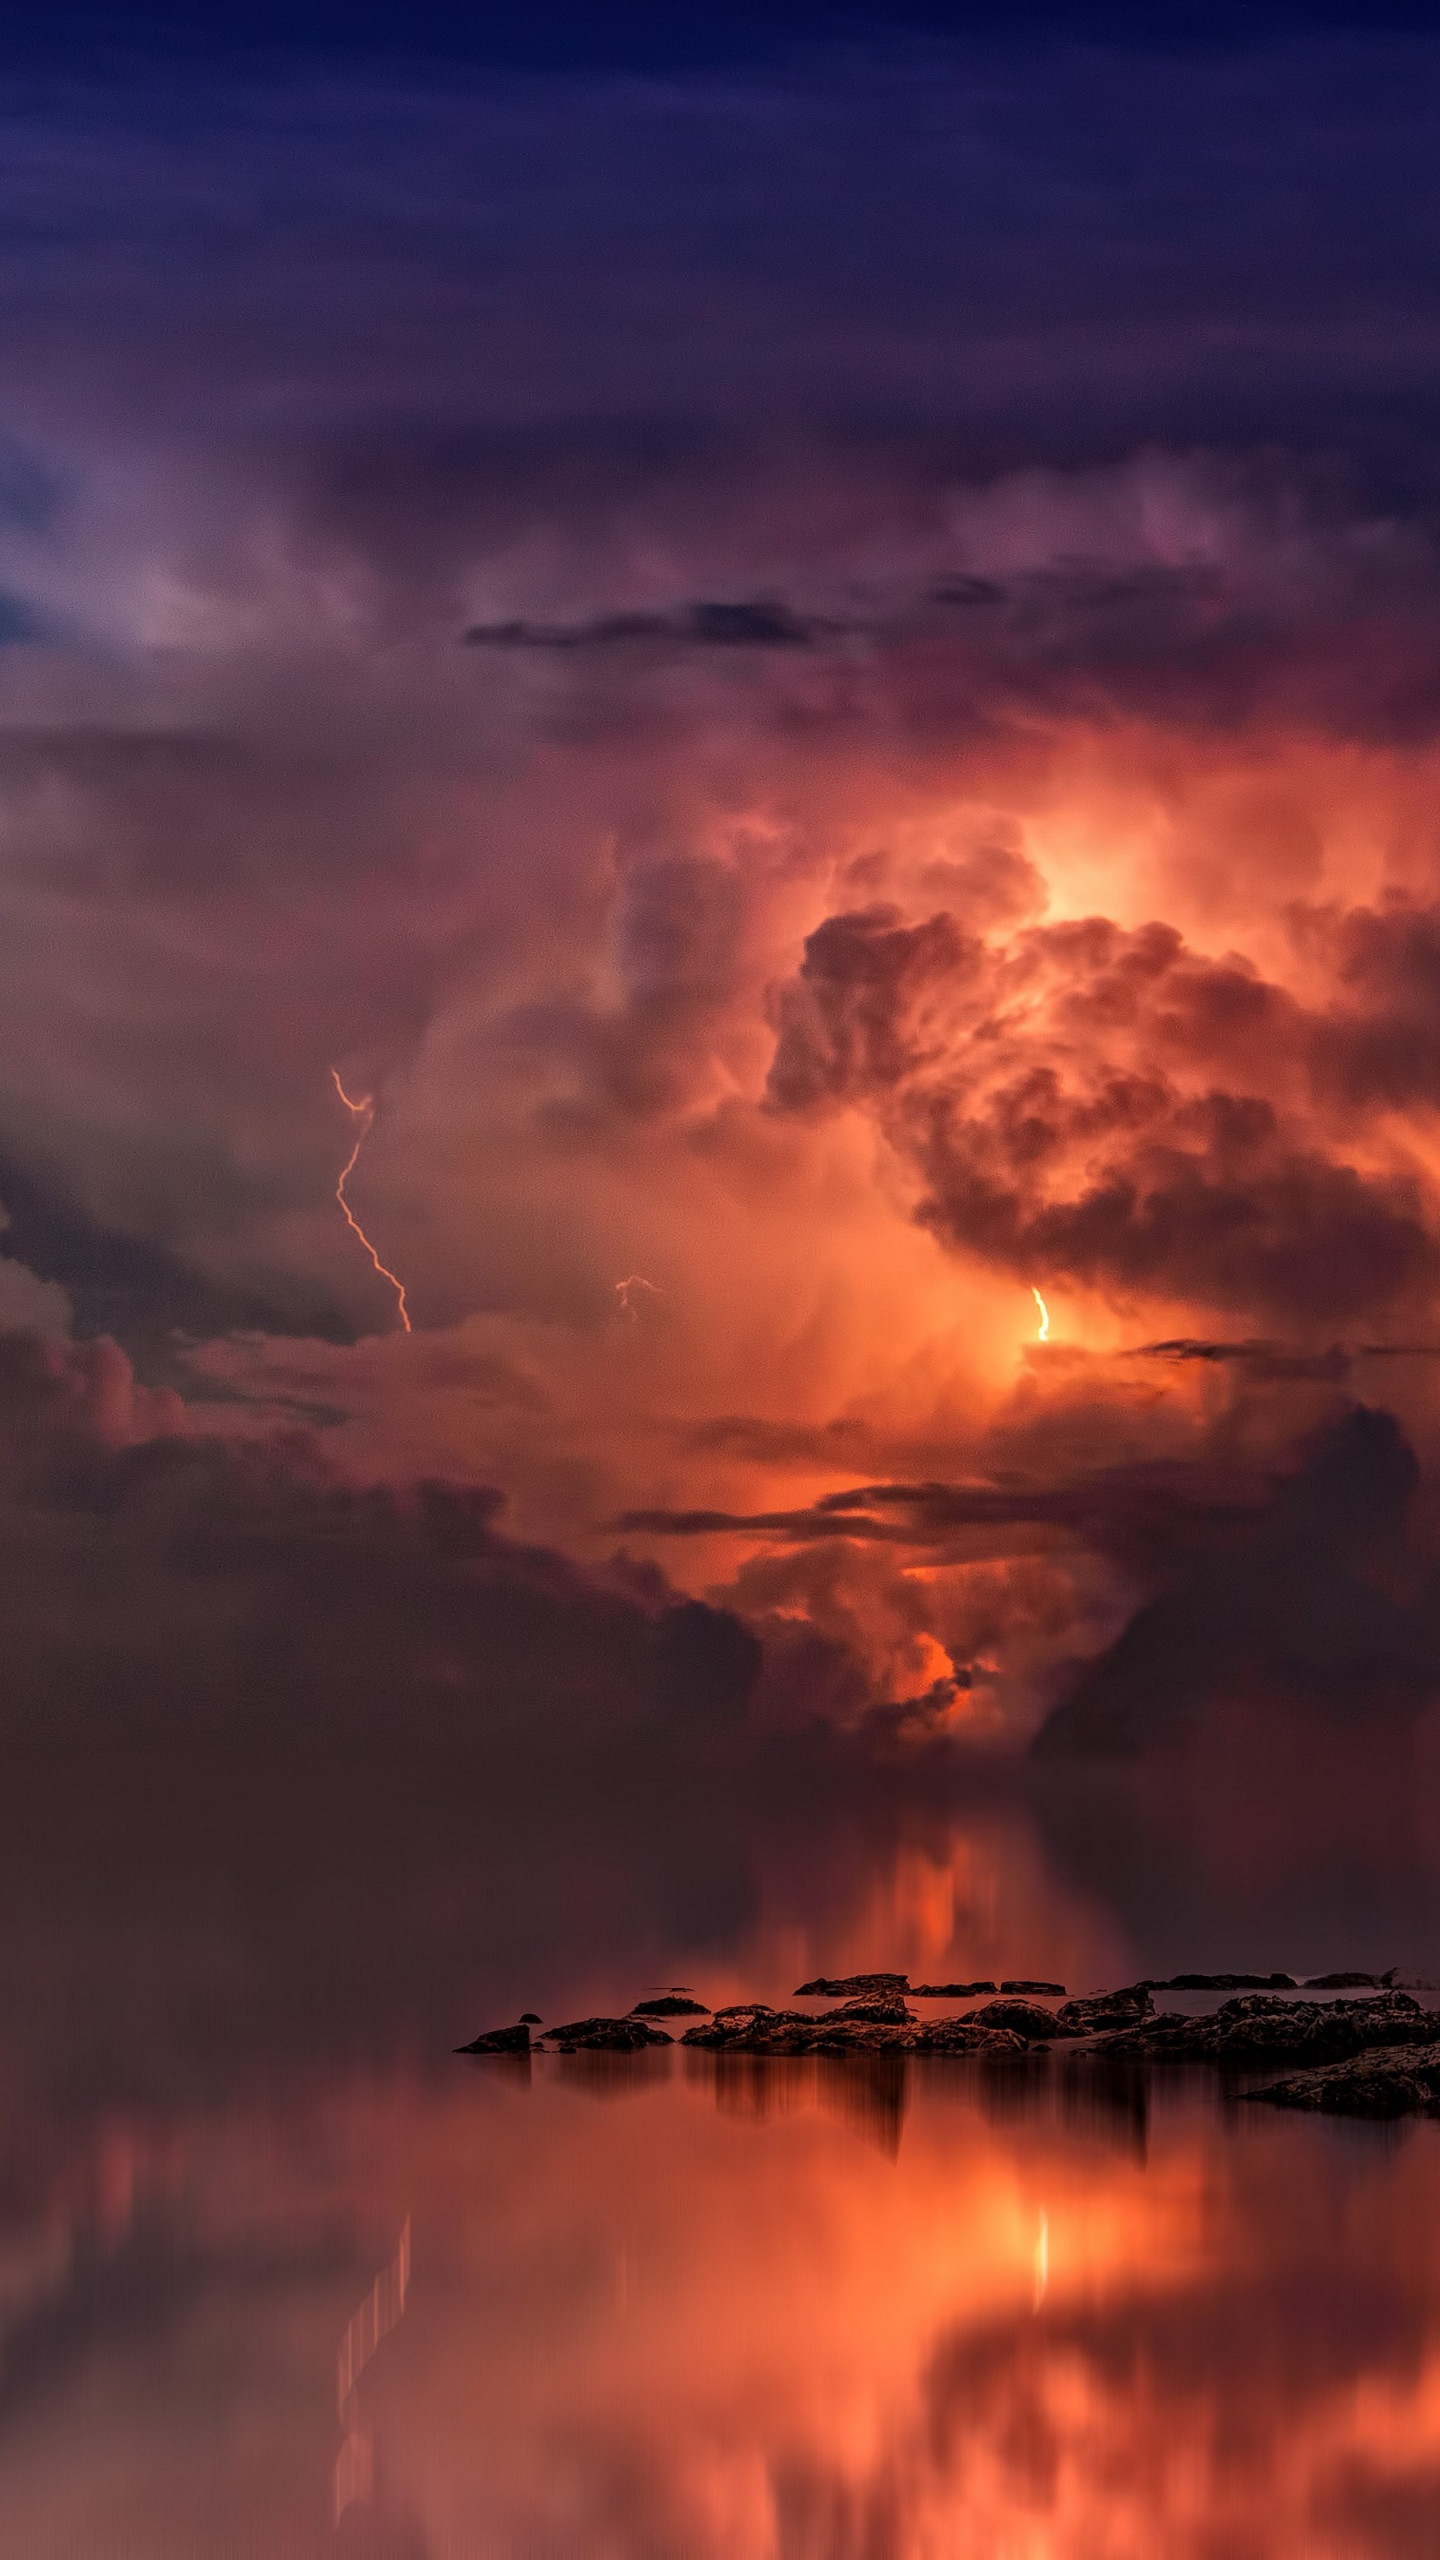 Lightning and thunderstorm in the sky wallpaper 1440x2560